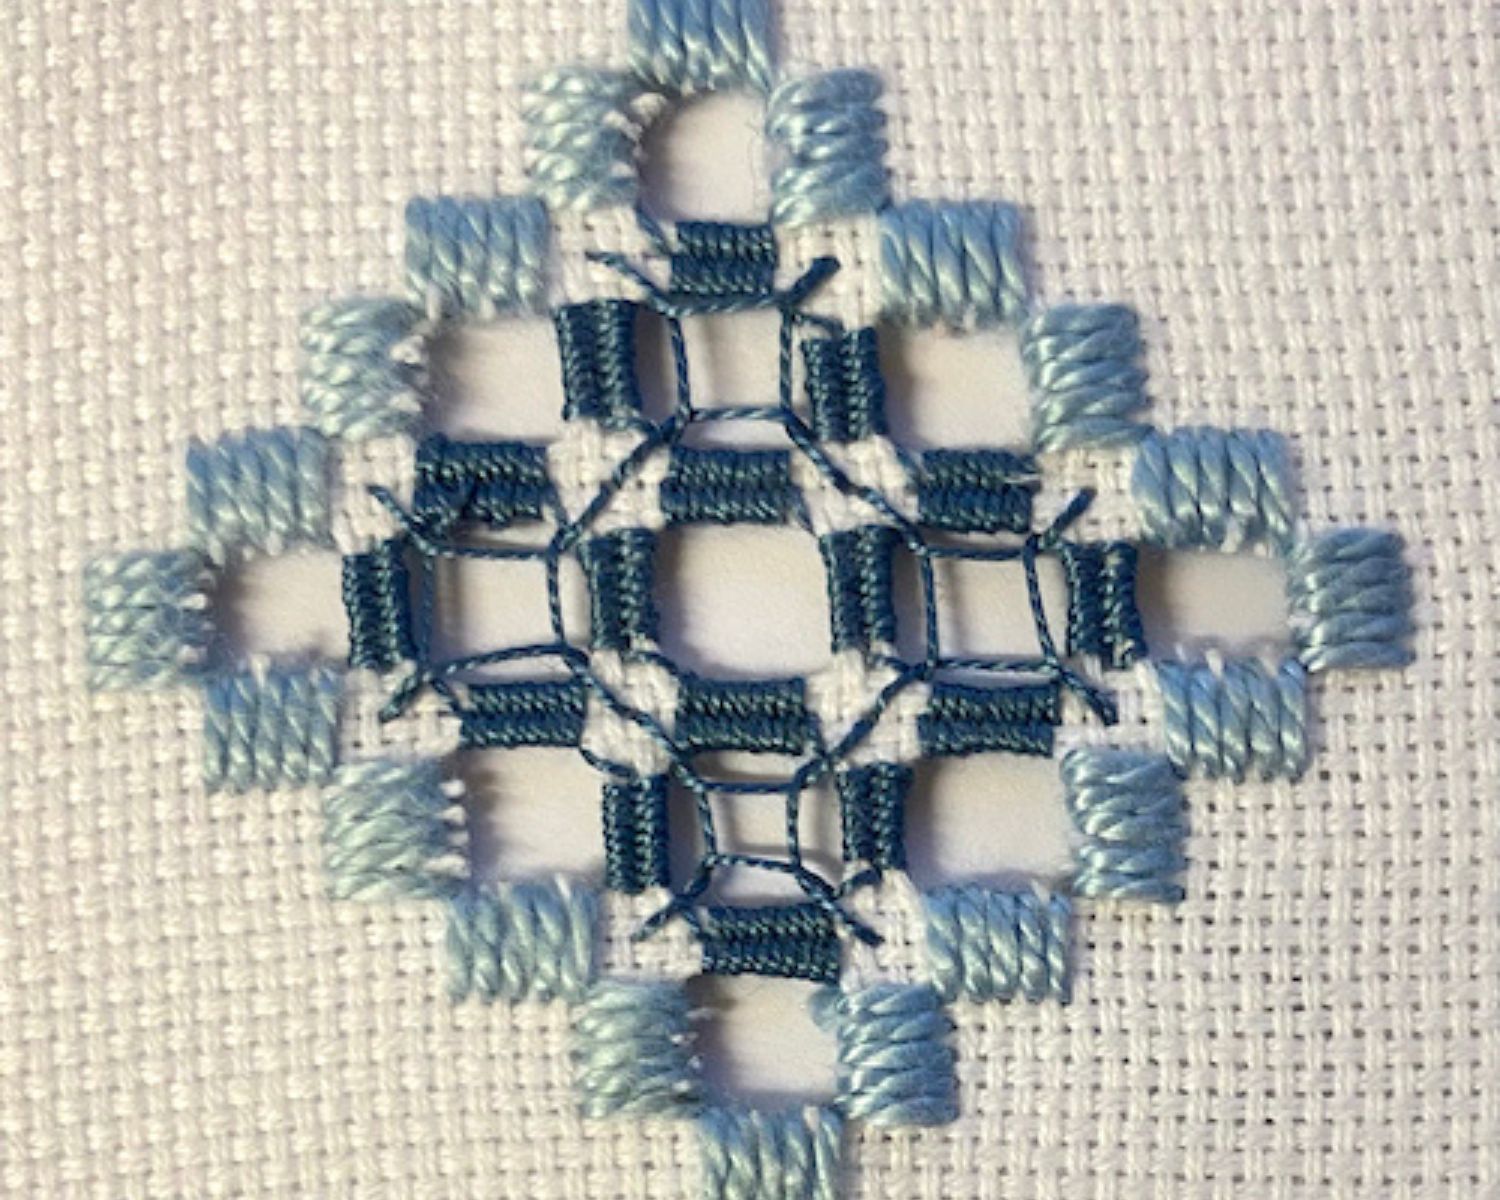 16-astounding-facts-about-hardanger-embroidery